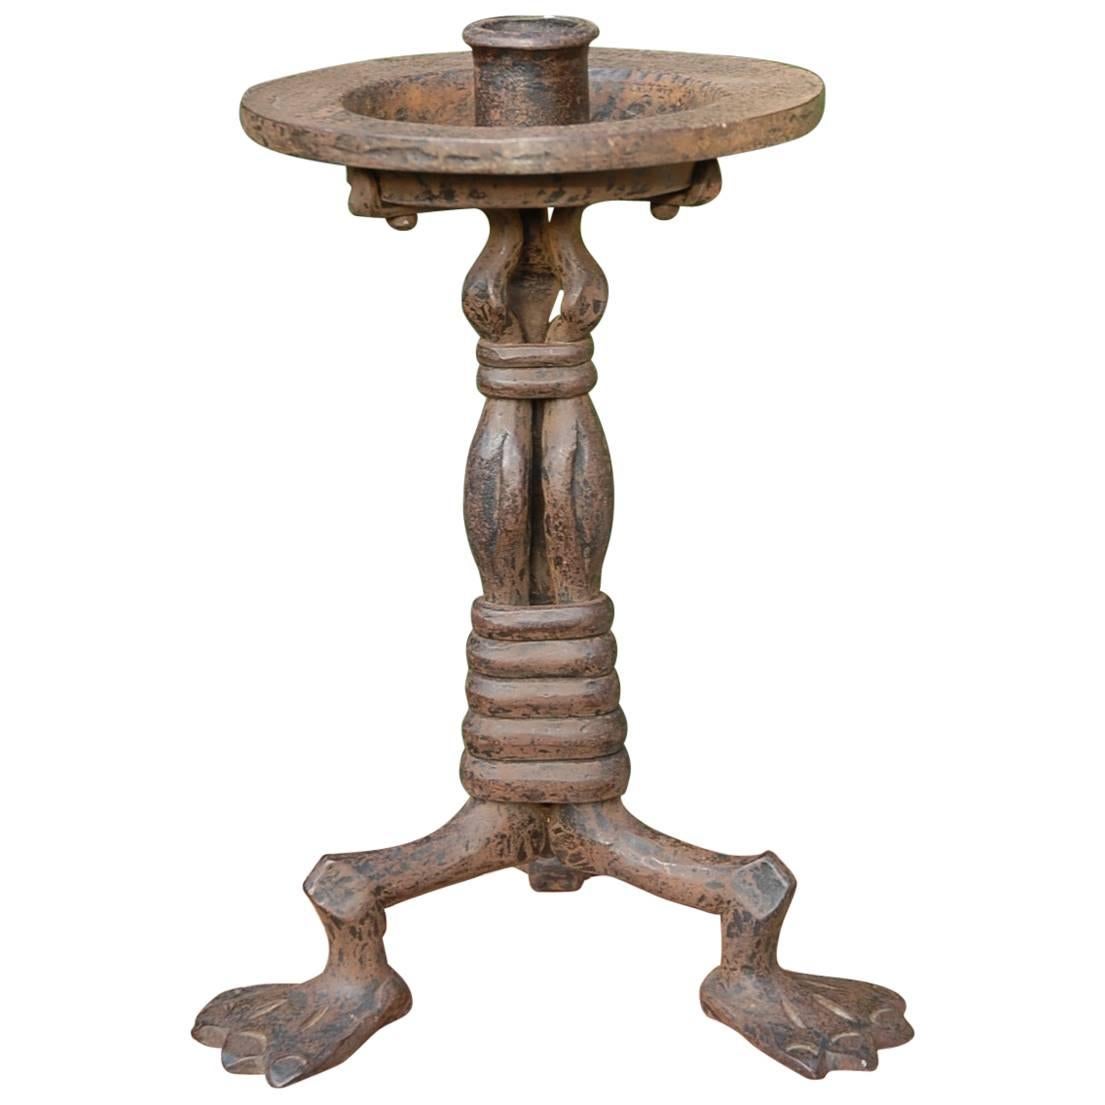 Unique Hand Forged in Fire Artistic Design Candlestick with Three Frog like Legs For Sale